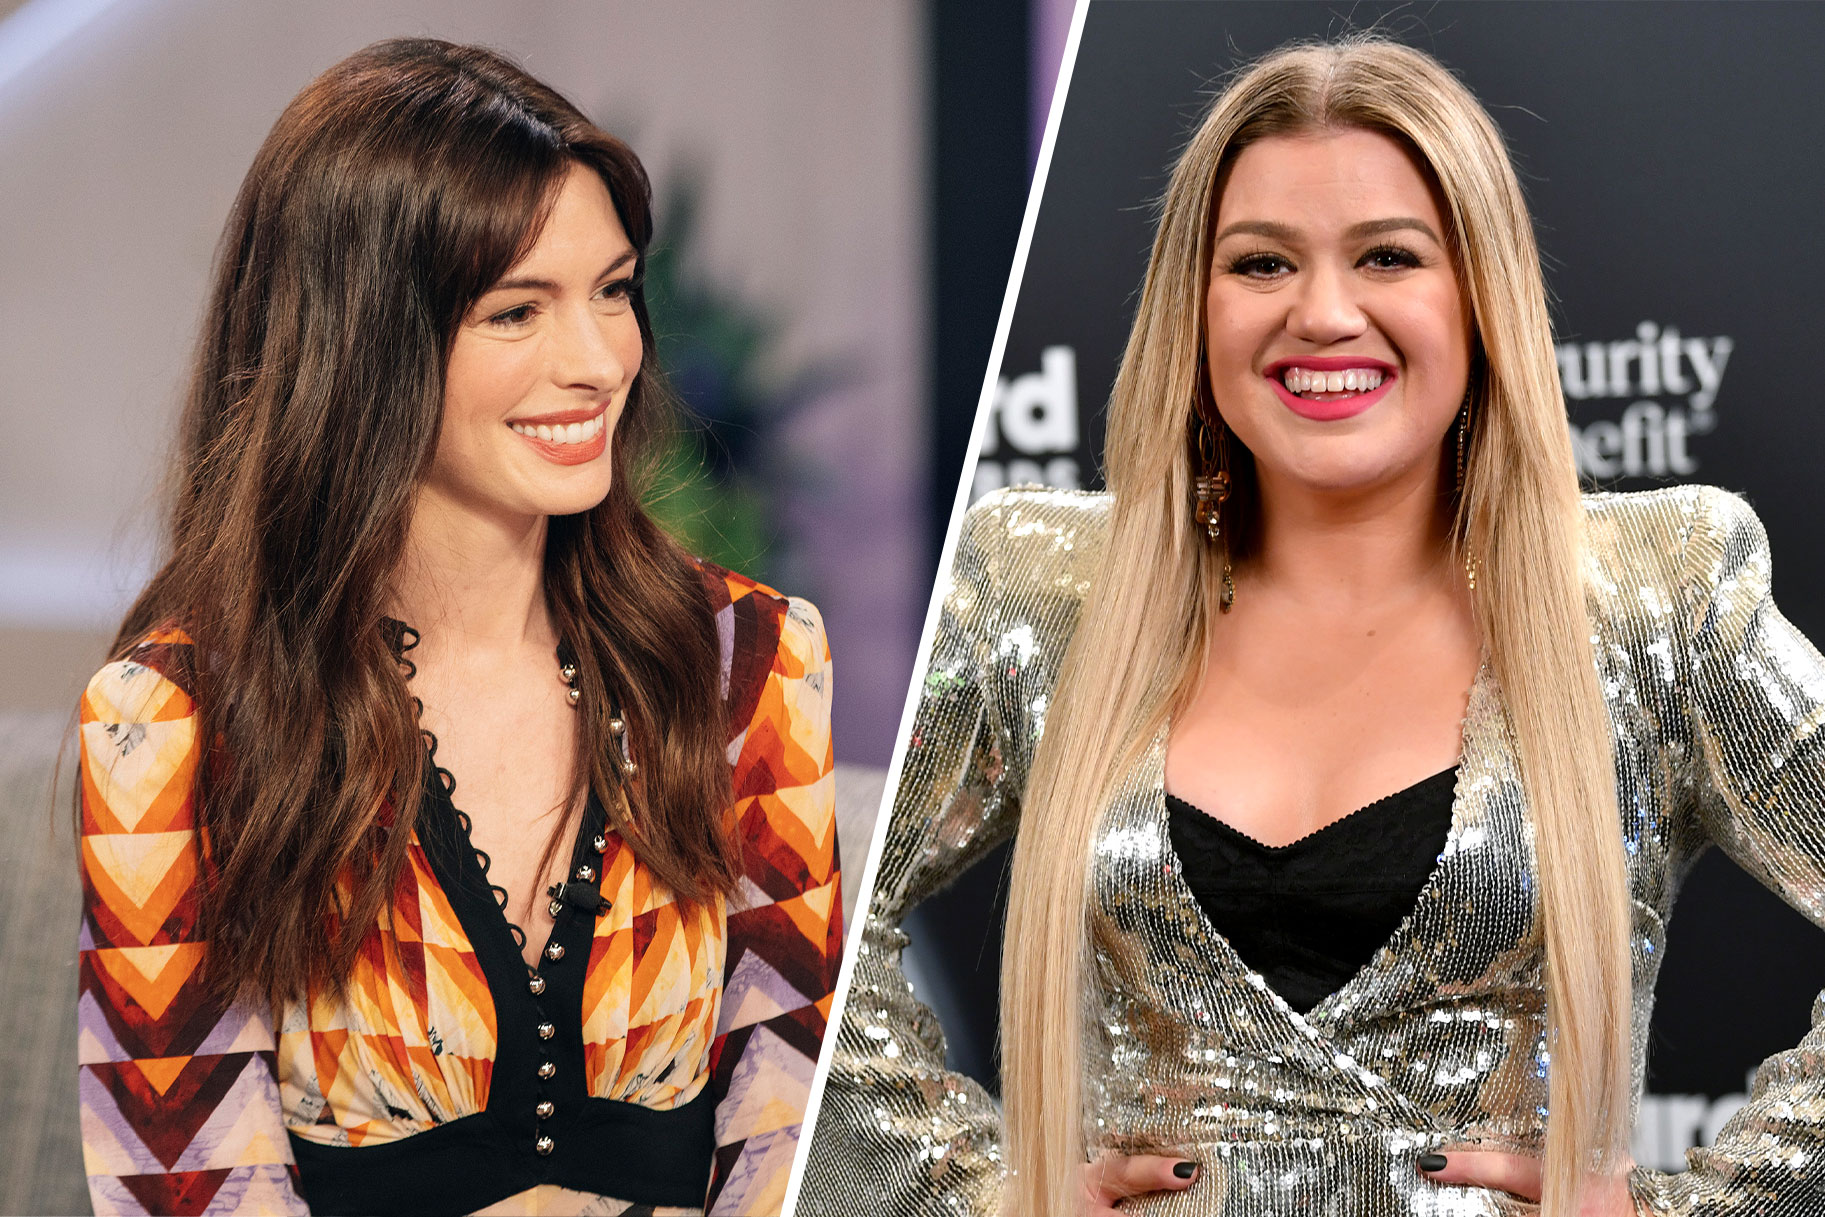 Split image of Anne Hathaway and Kelly Clarkson